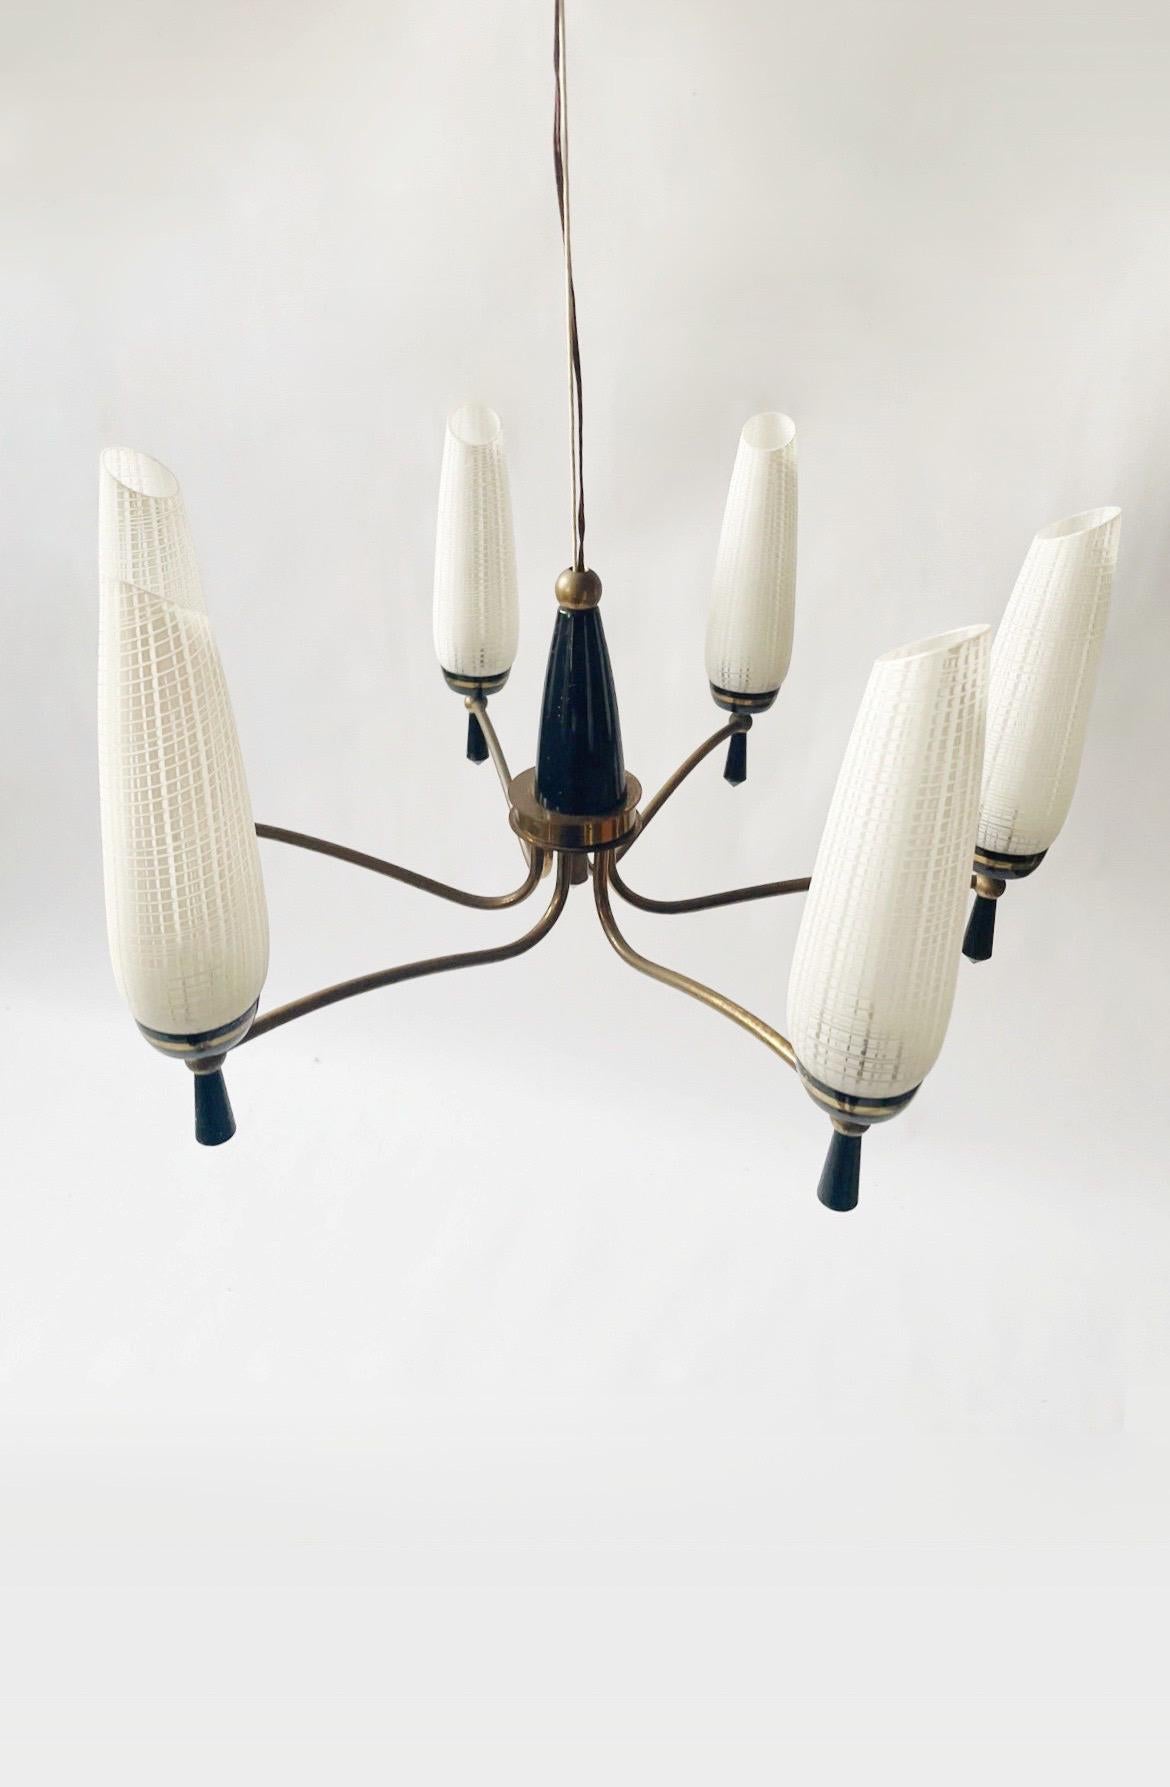 Beautiful vintage chandelier from Italy ca. 1960. Excellent condition for its age, glass shades have no chips or cracks. Original exposed wire makes the length of the fixture adjustable.